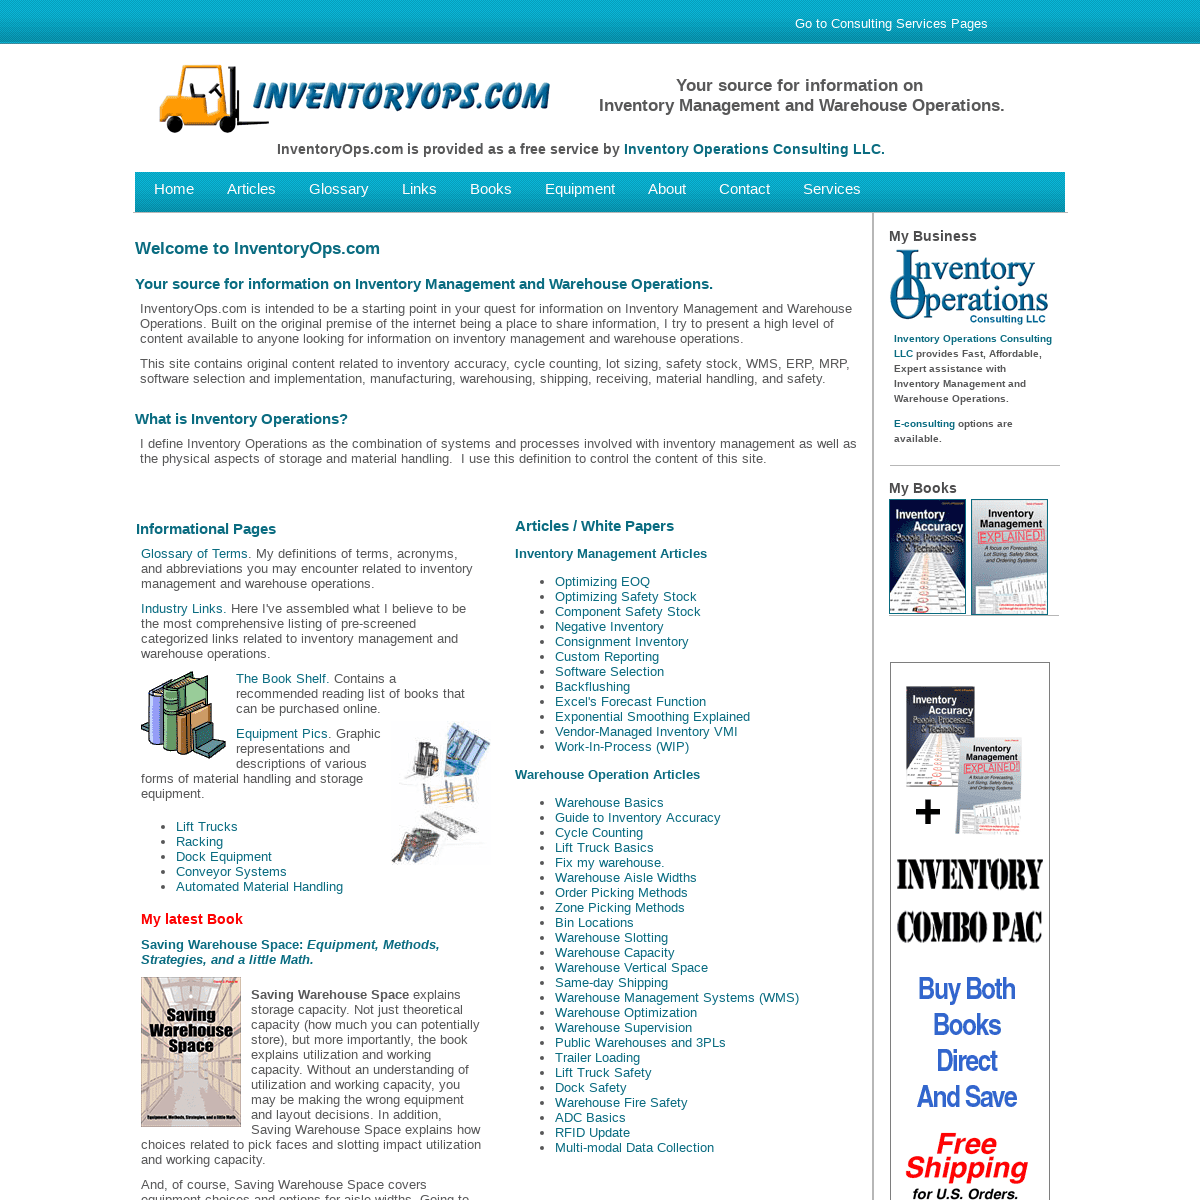 A complete backup of inventoryops.com